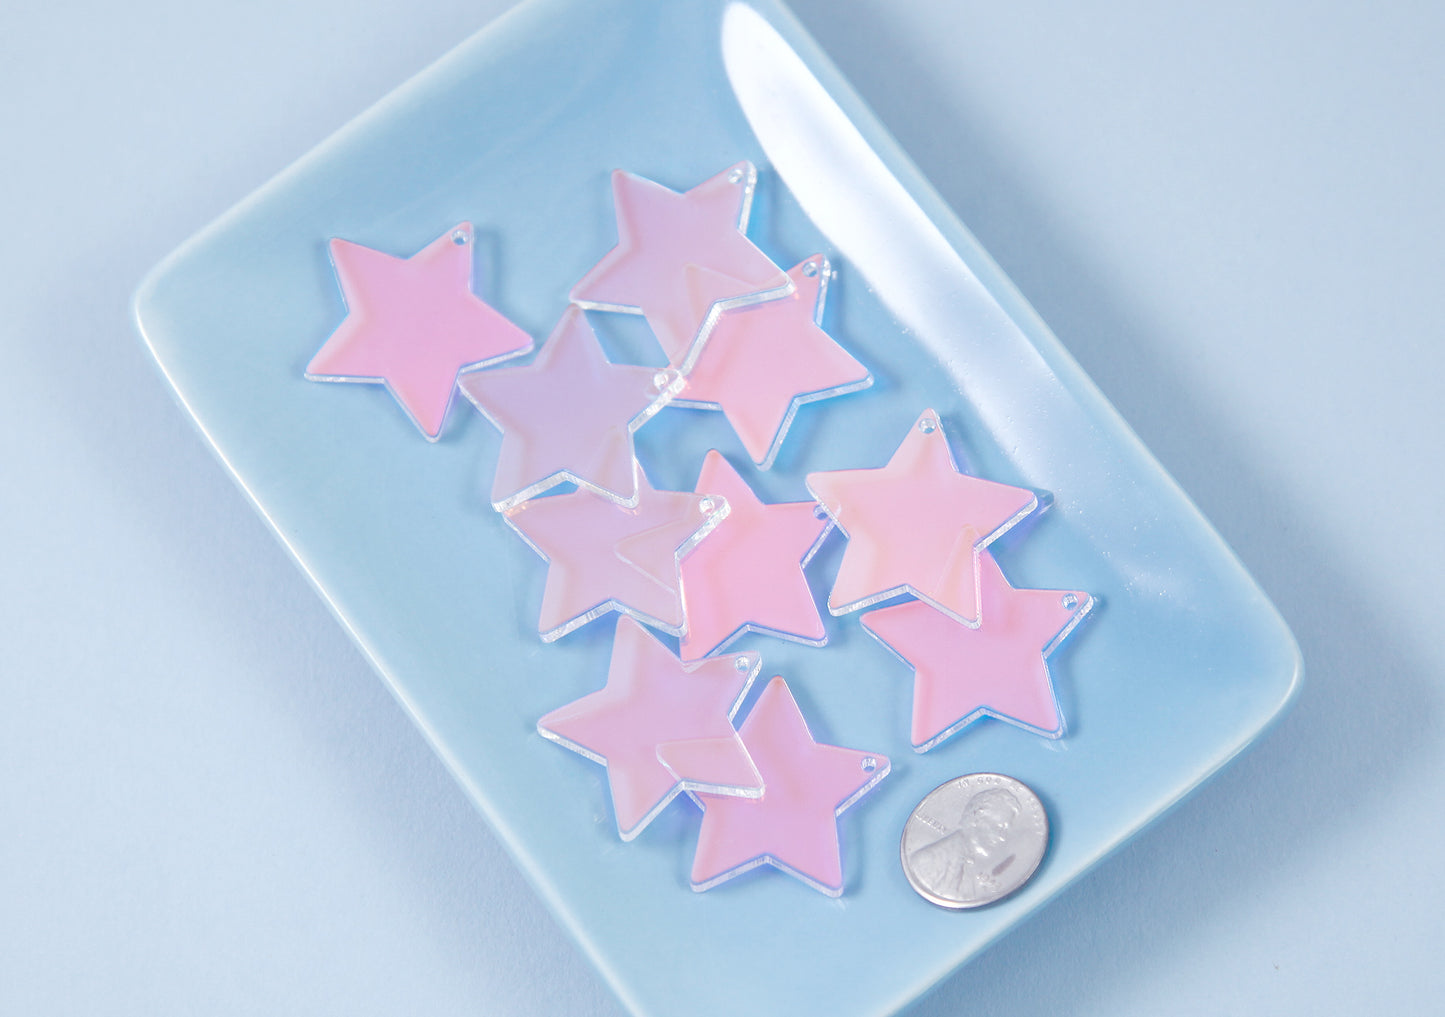 Holographic Star Charms - 30mm Color Shift Stars Resin Charms - 6 pc set